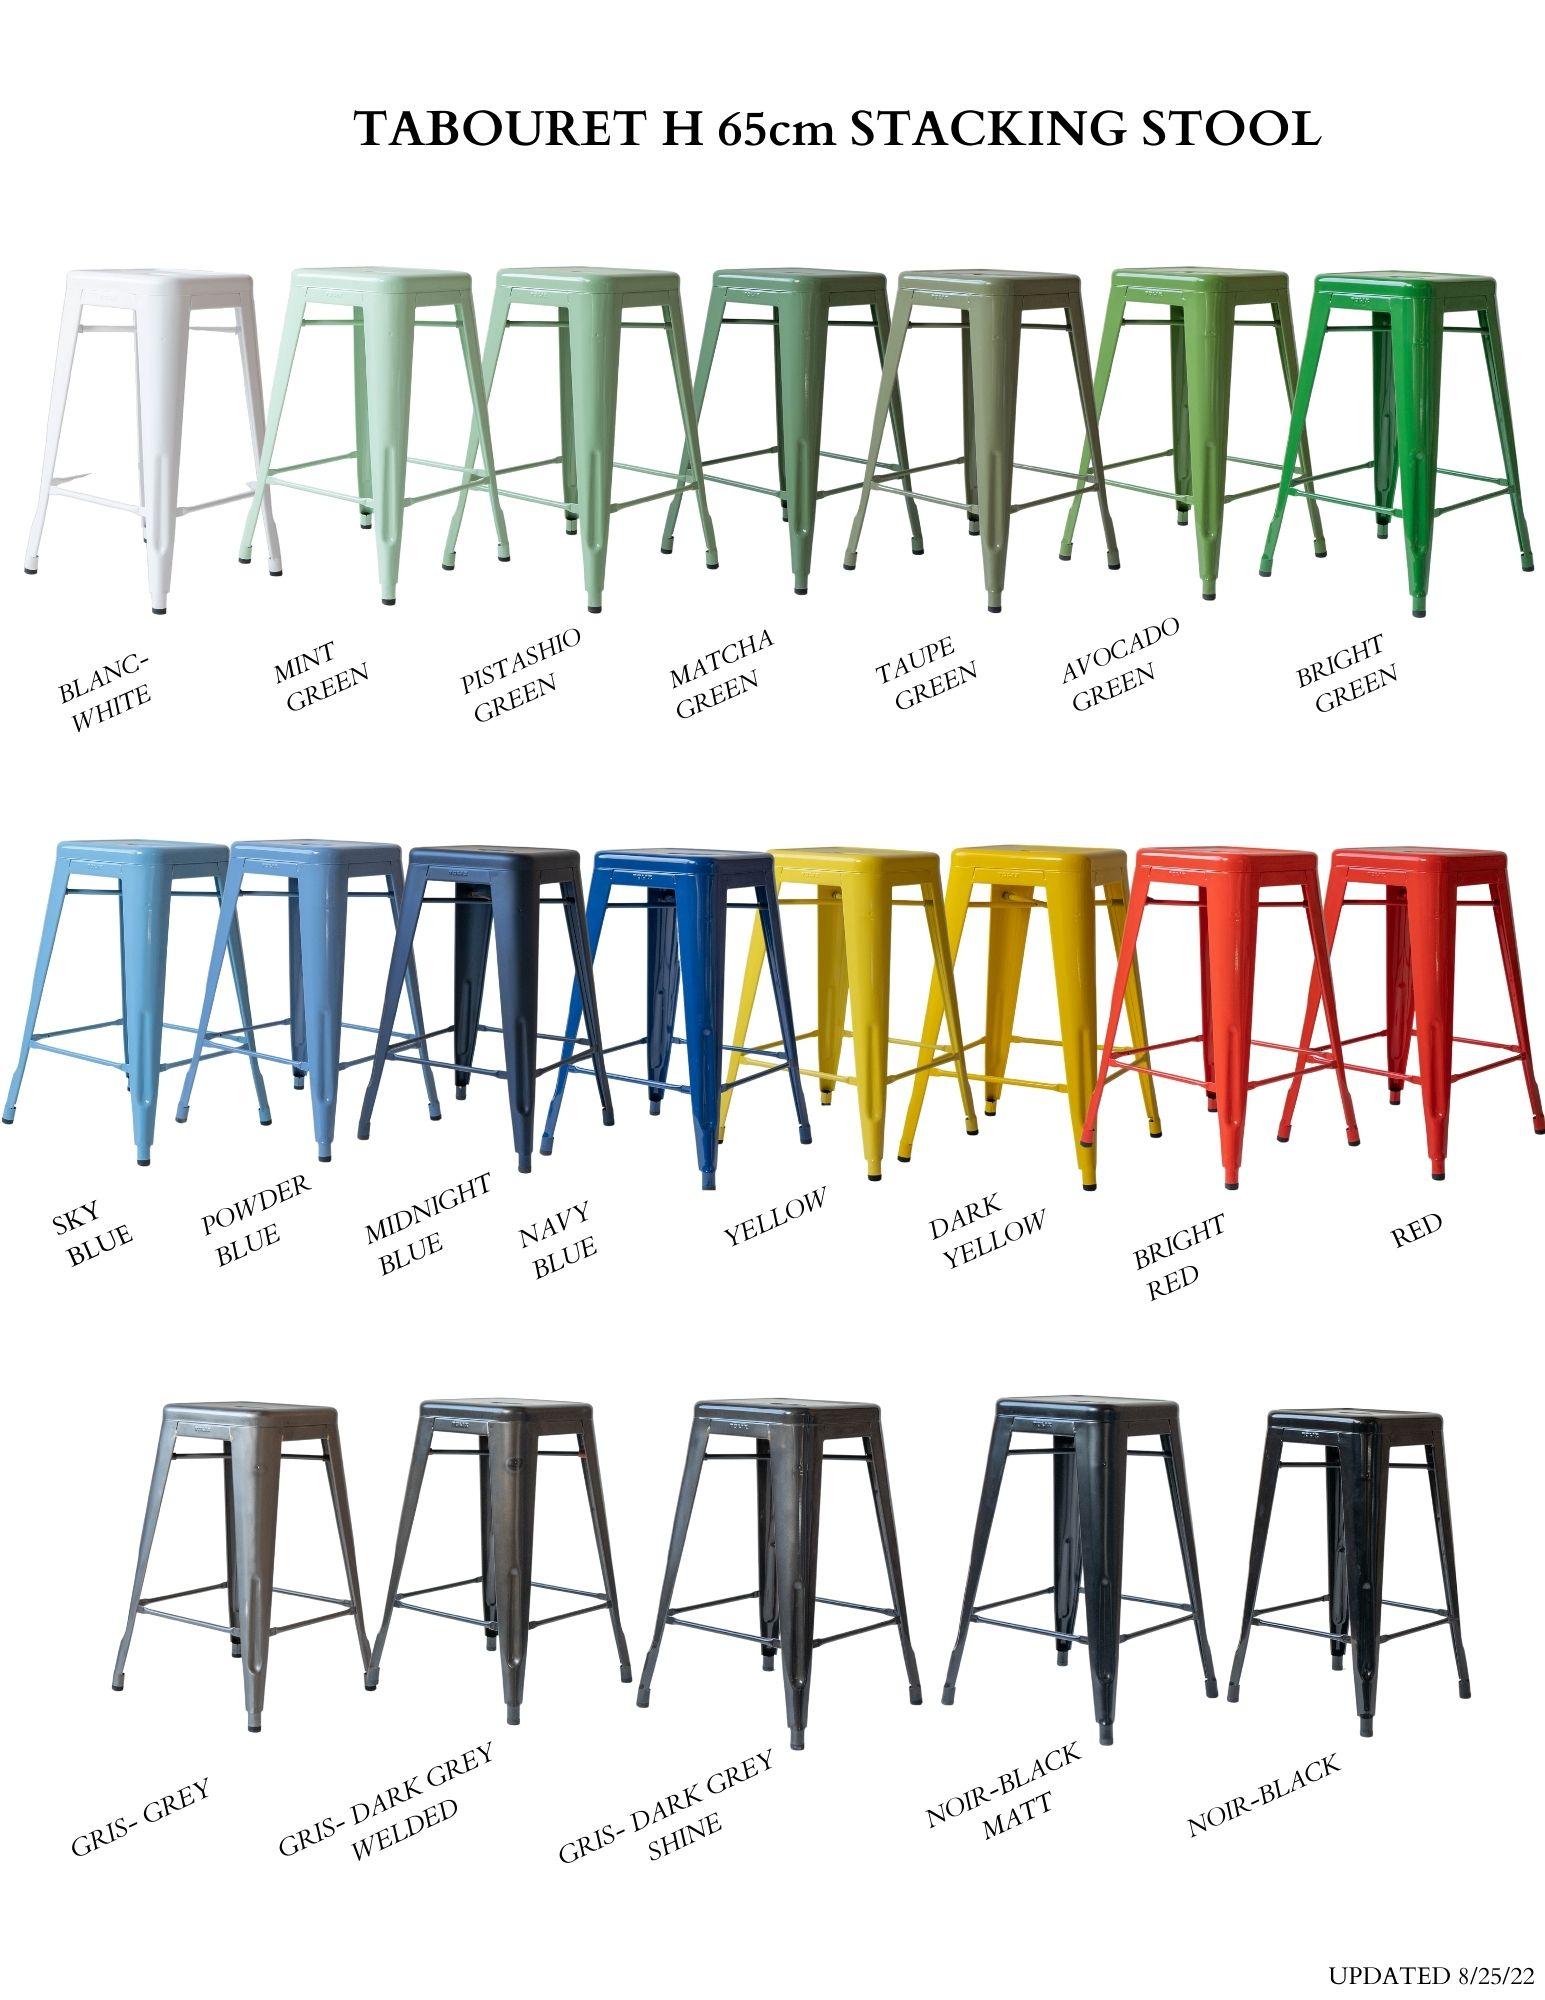 Authentic French Tolix Steel Stacking Chairs, Showroom Samples 100's Available 12